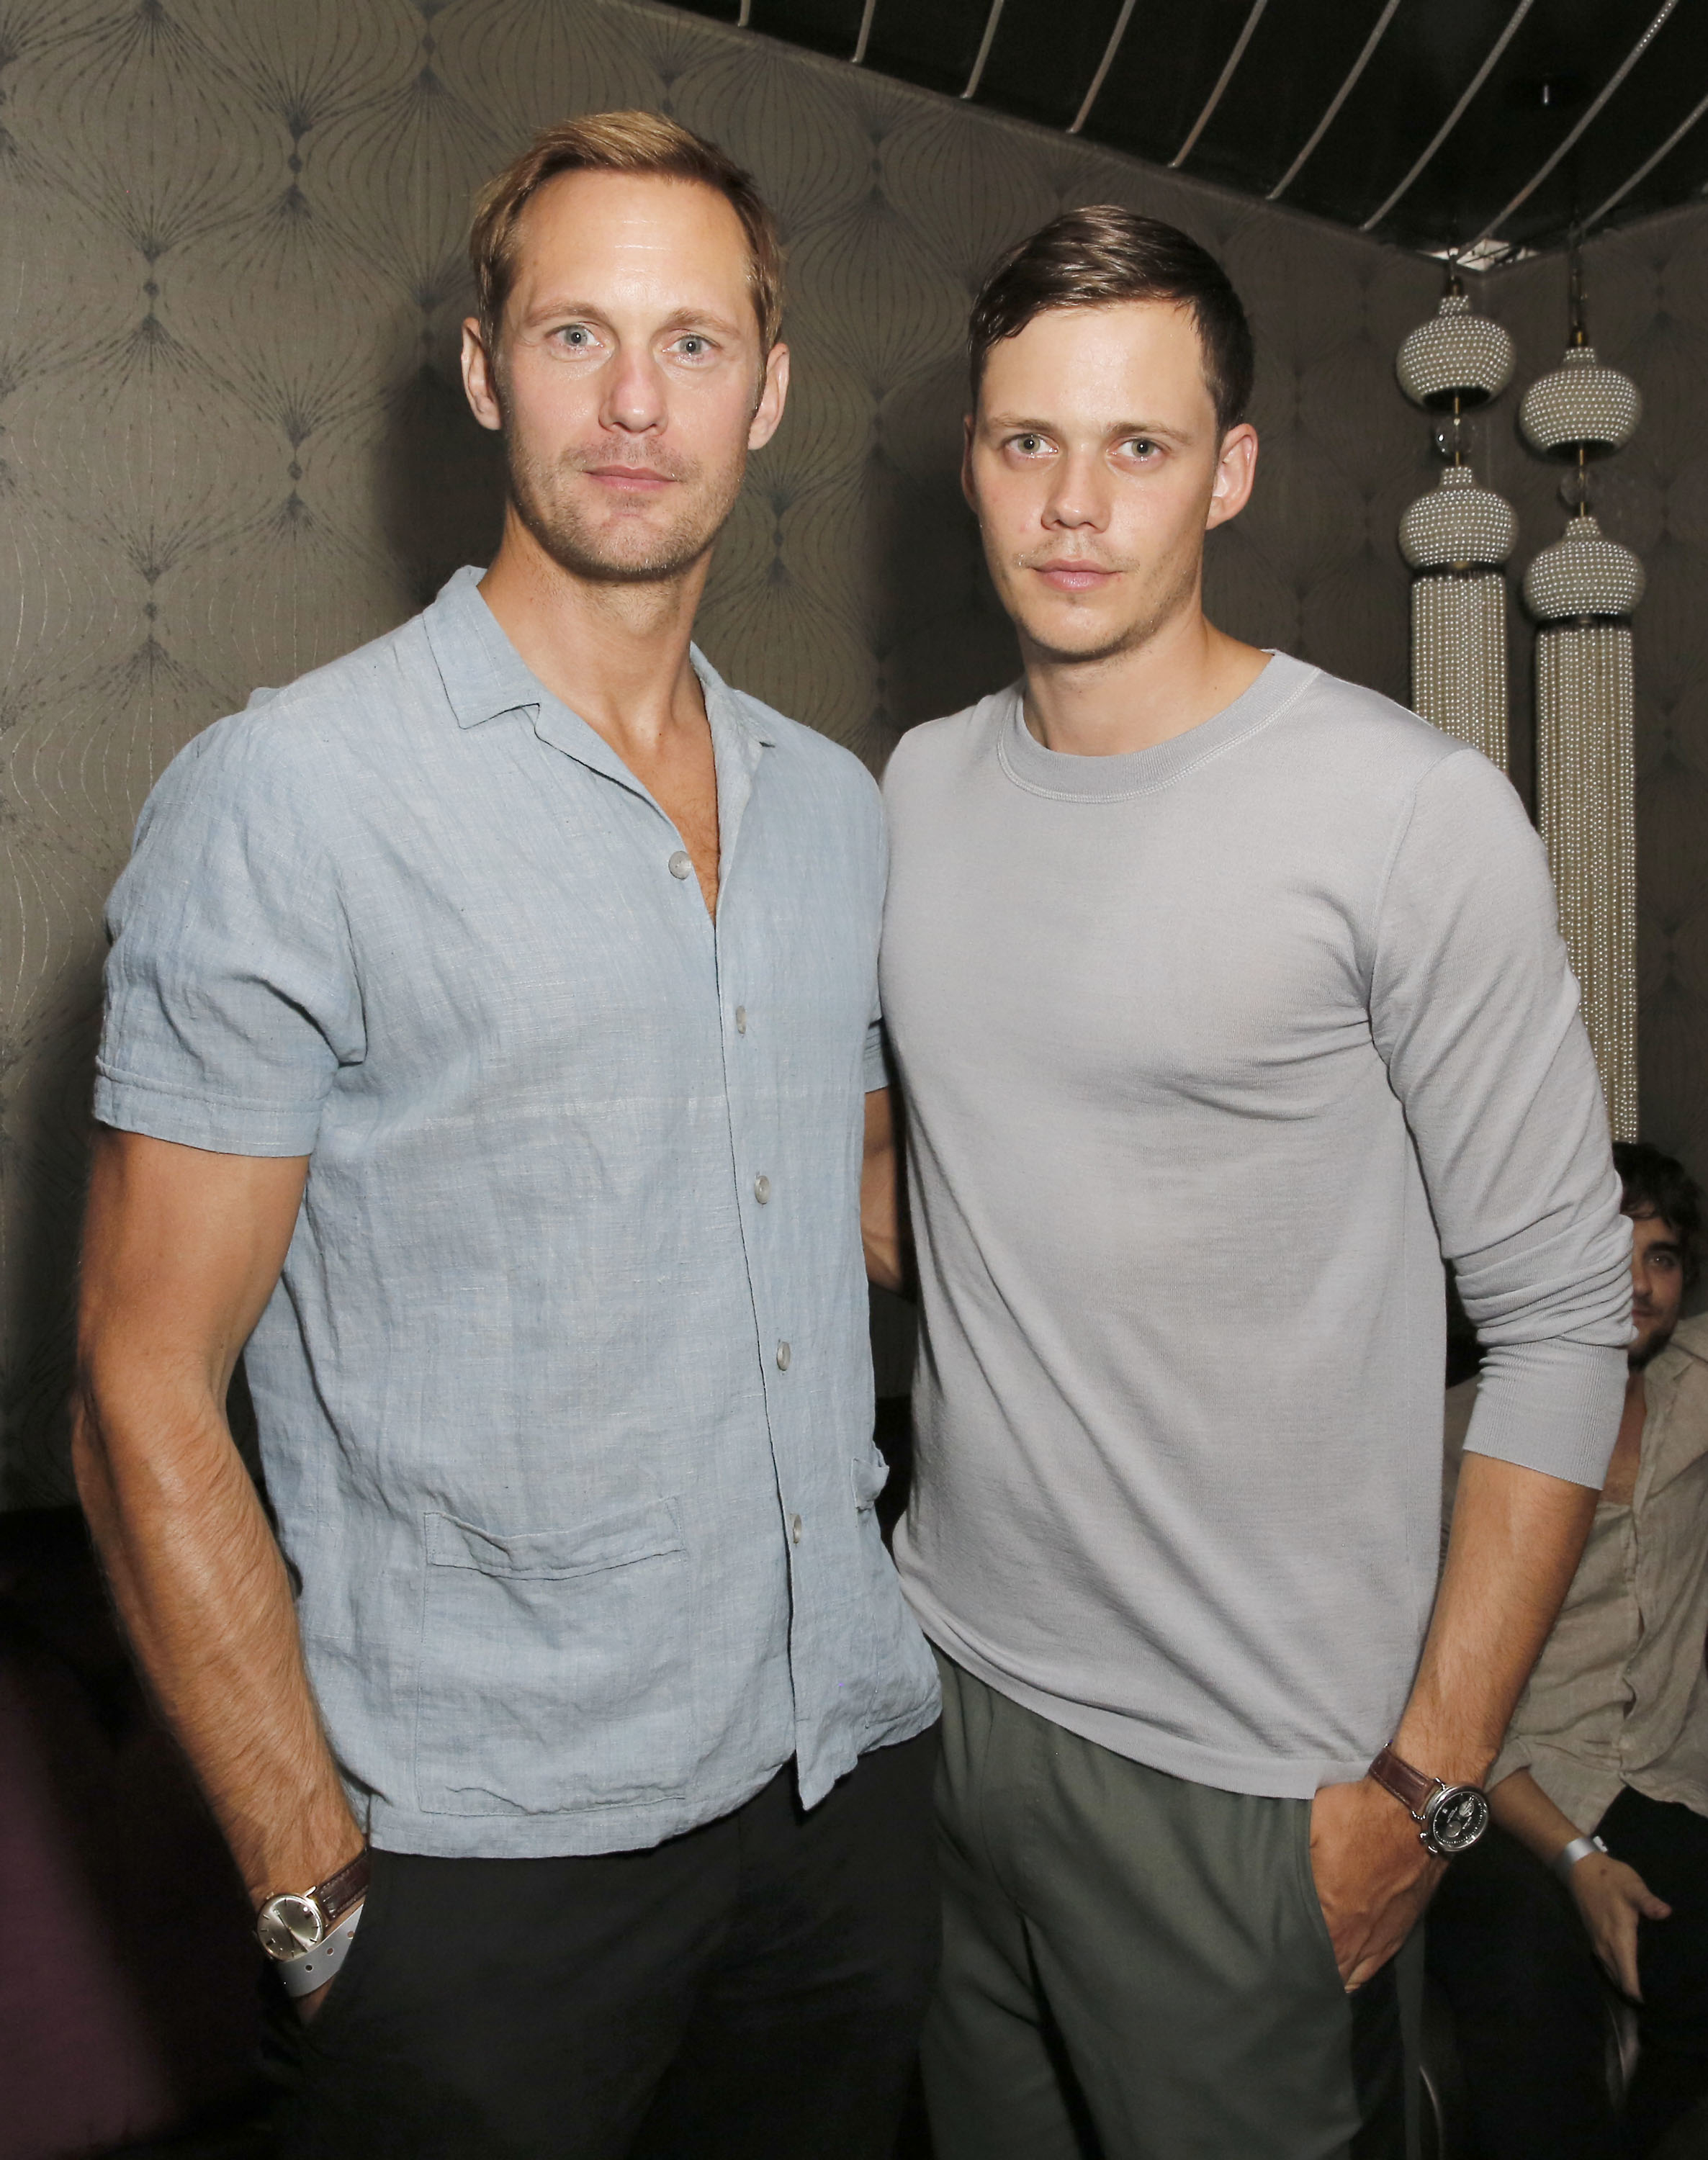 Alexander and Bill posing together at an event